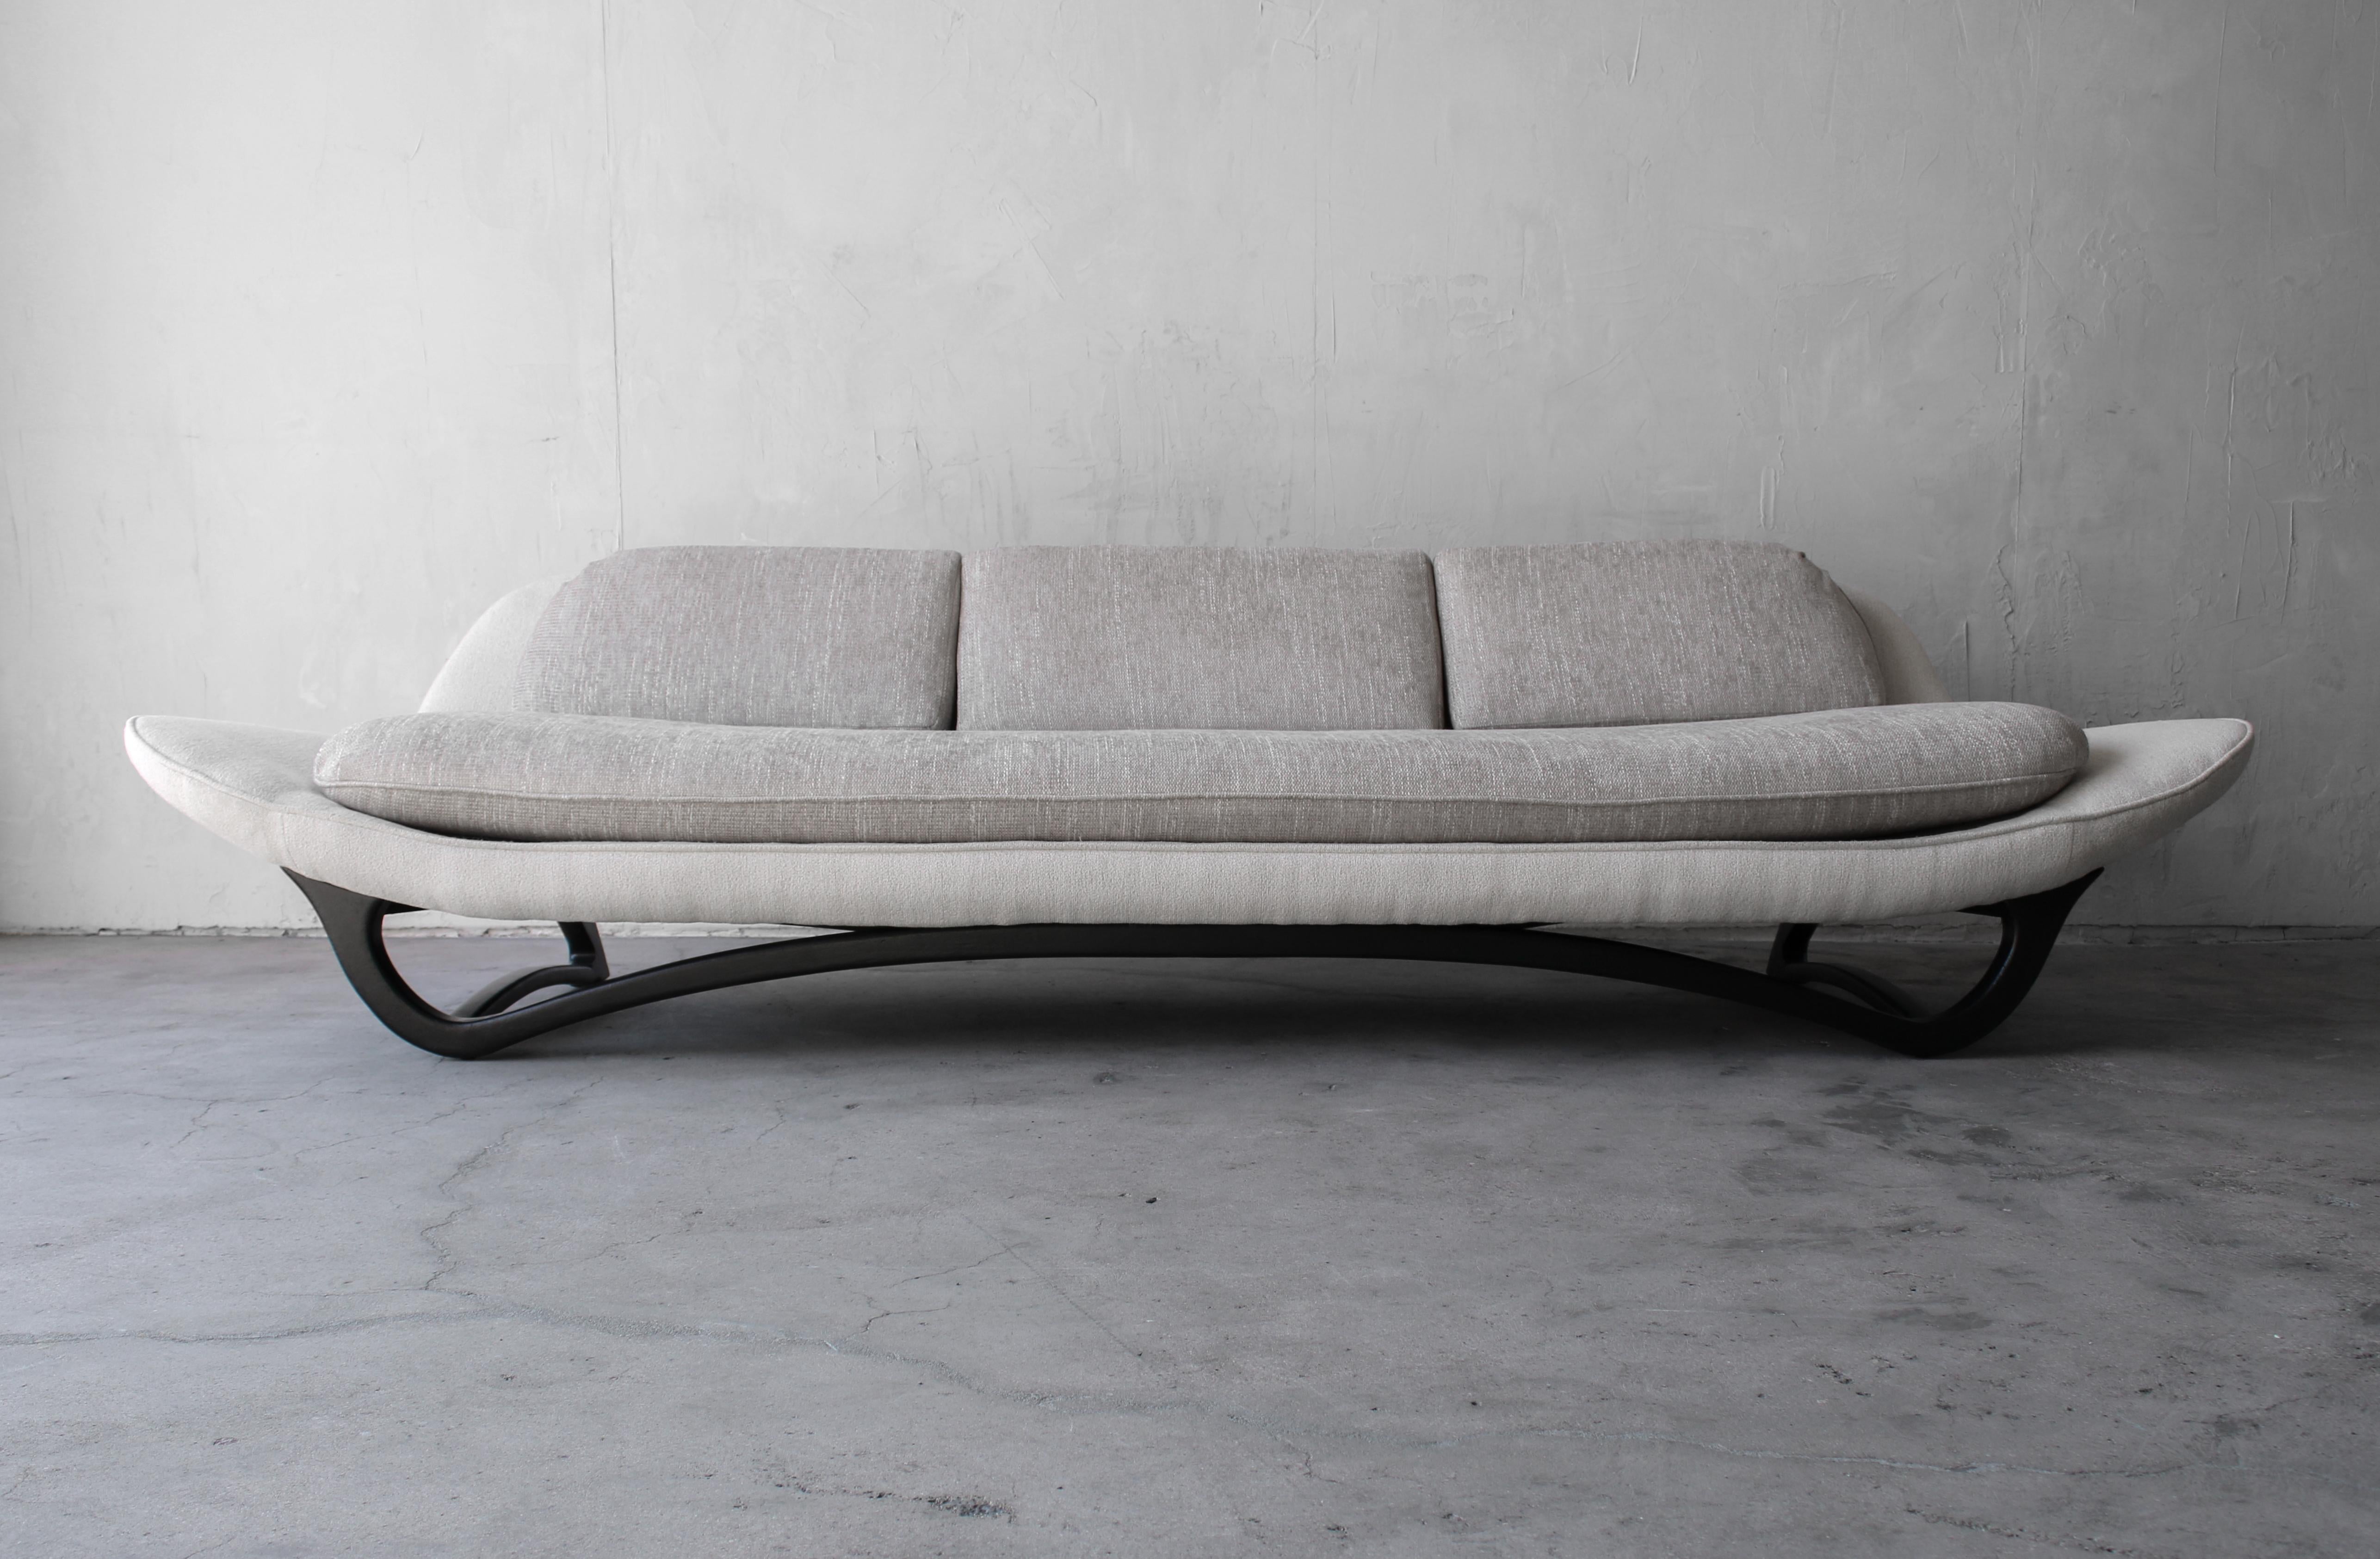 A classic, true 1960's, mid-century gondola sofa. Amazing lines and details make it a real show stopper. It measures 9ft in length and is supported by a perfectly sculpted base. A true classic sofa that has been updated for todays modern